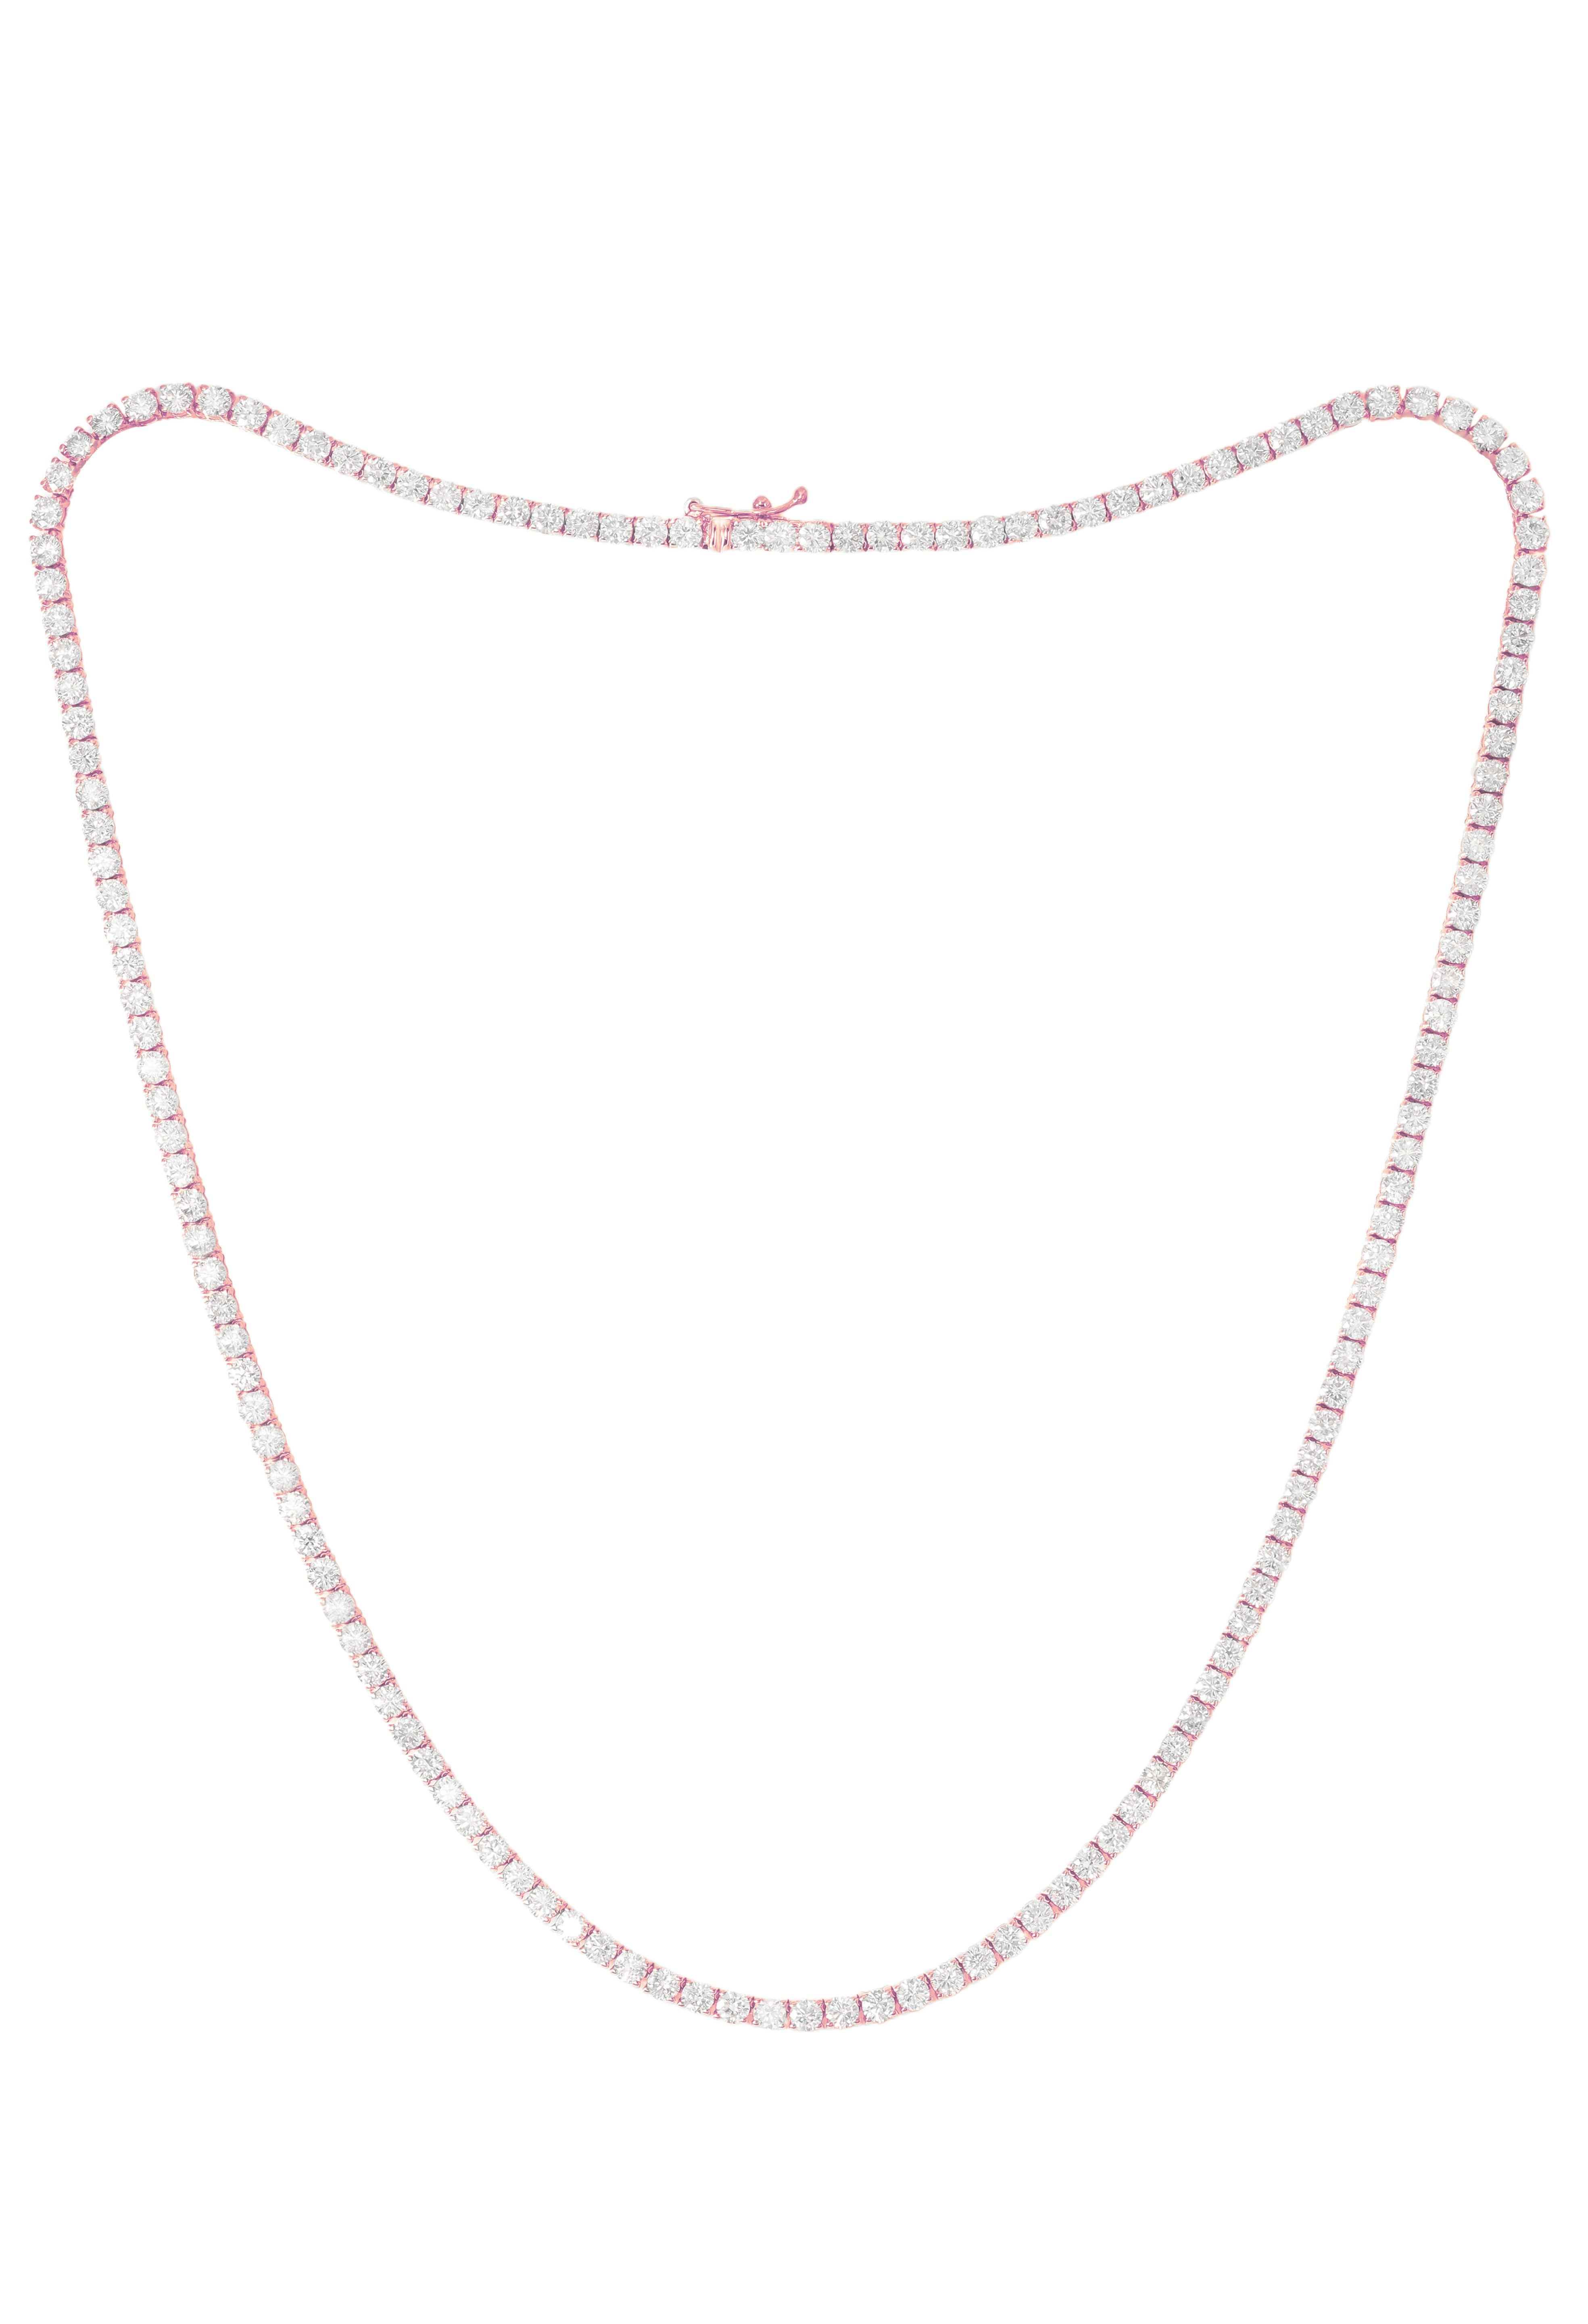 14K Rose Gold Diamond Straight Line Tennis Necklace Features 12.50Cts of Diamonds. Diana M. is a leading supplier of top-quality fine jewelry for over 35 years.
Diana M is one-stop shop for all your jewelry shopping, carrying line of diamond rings,